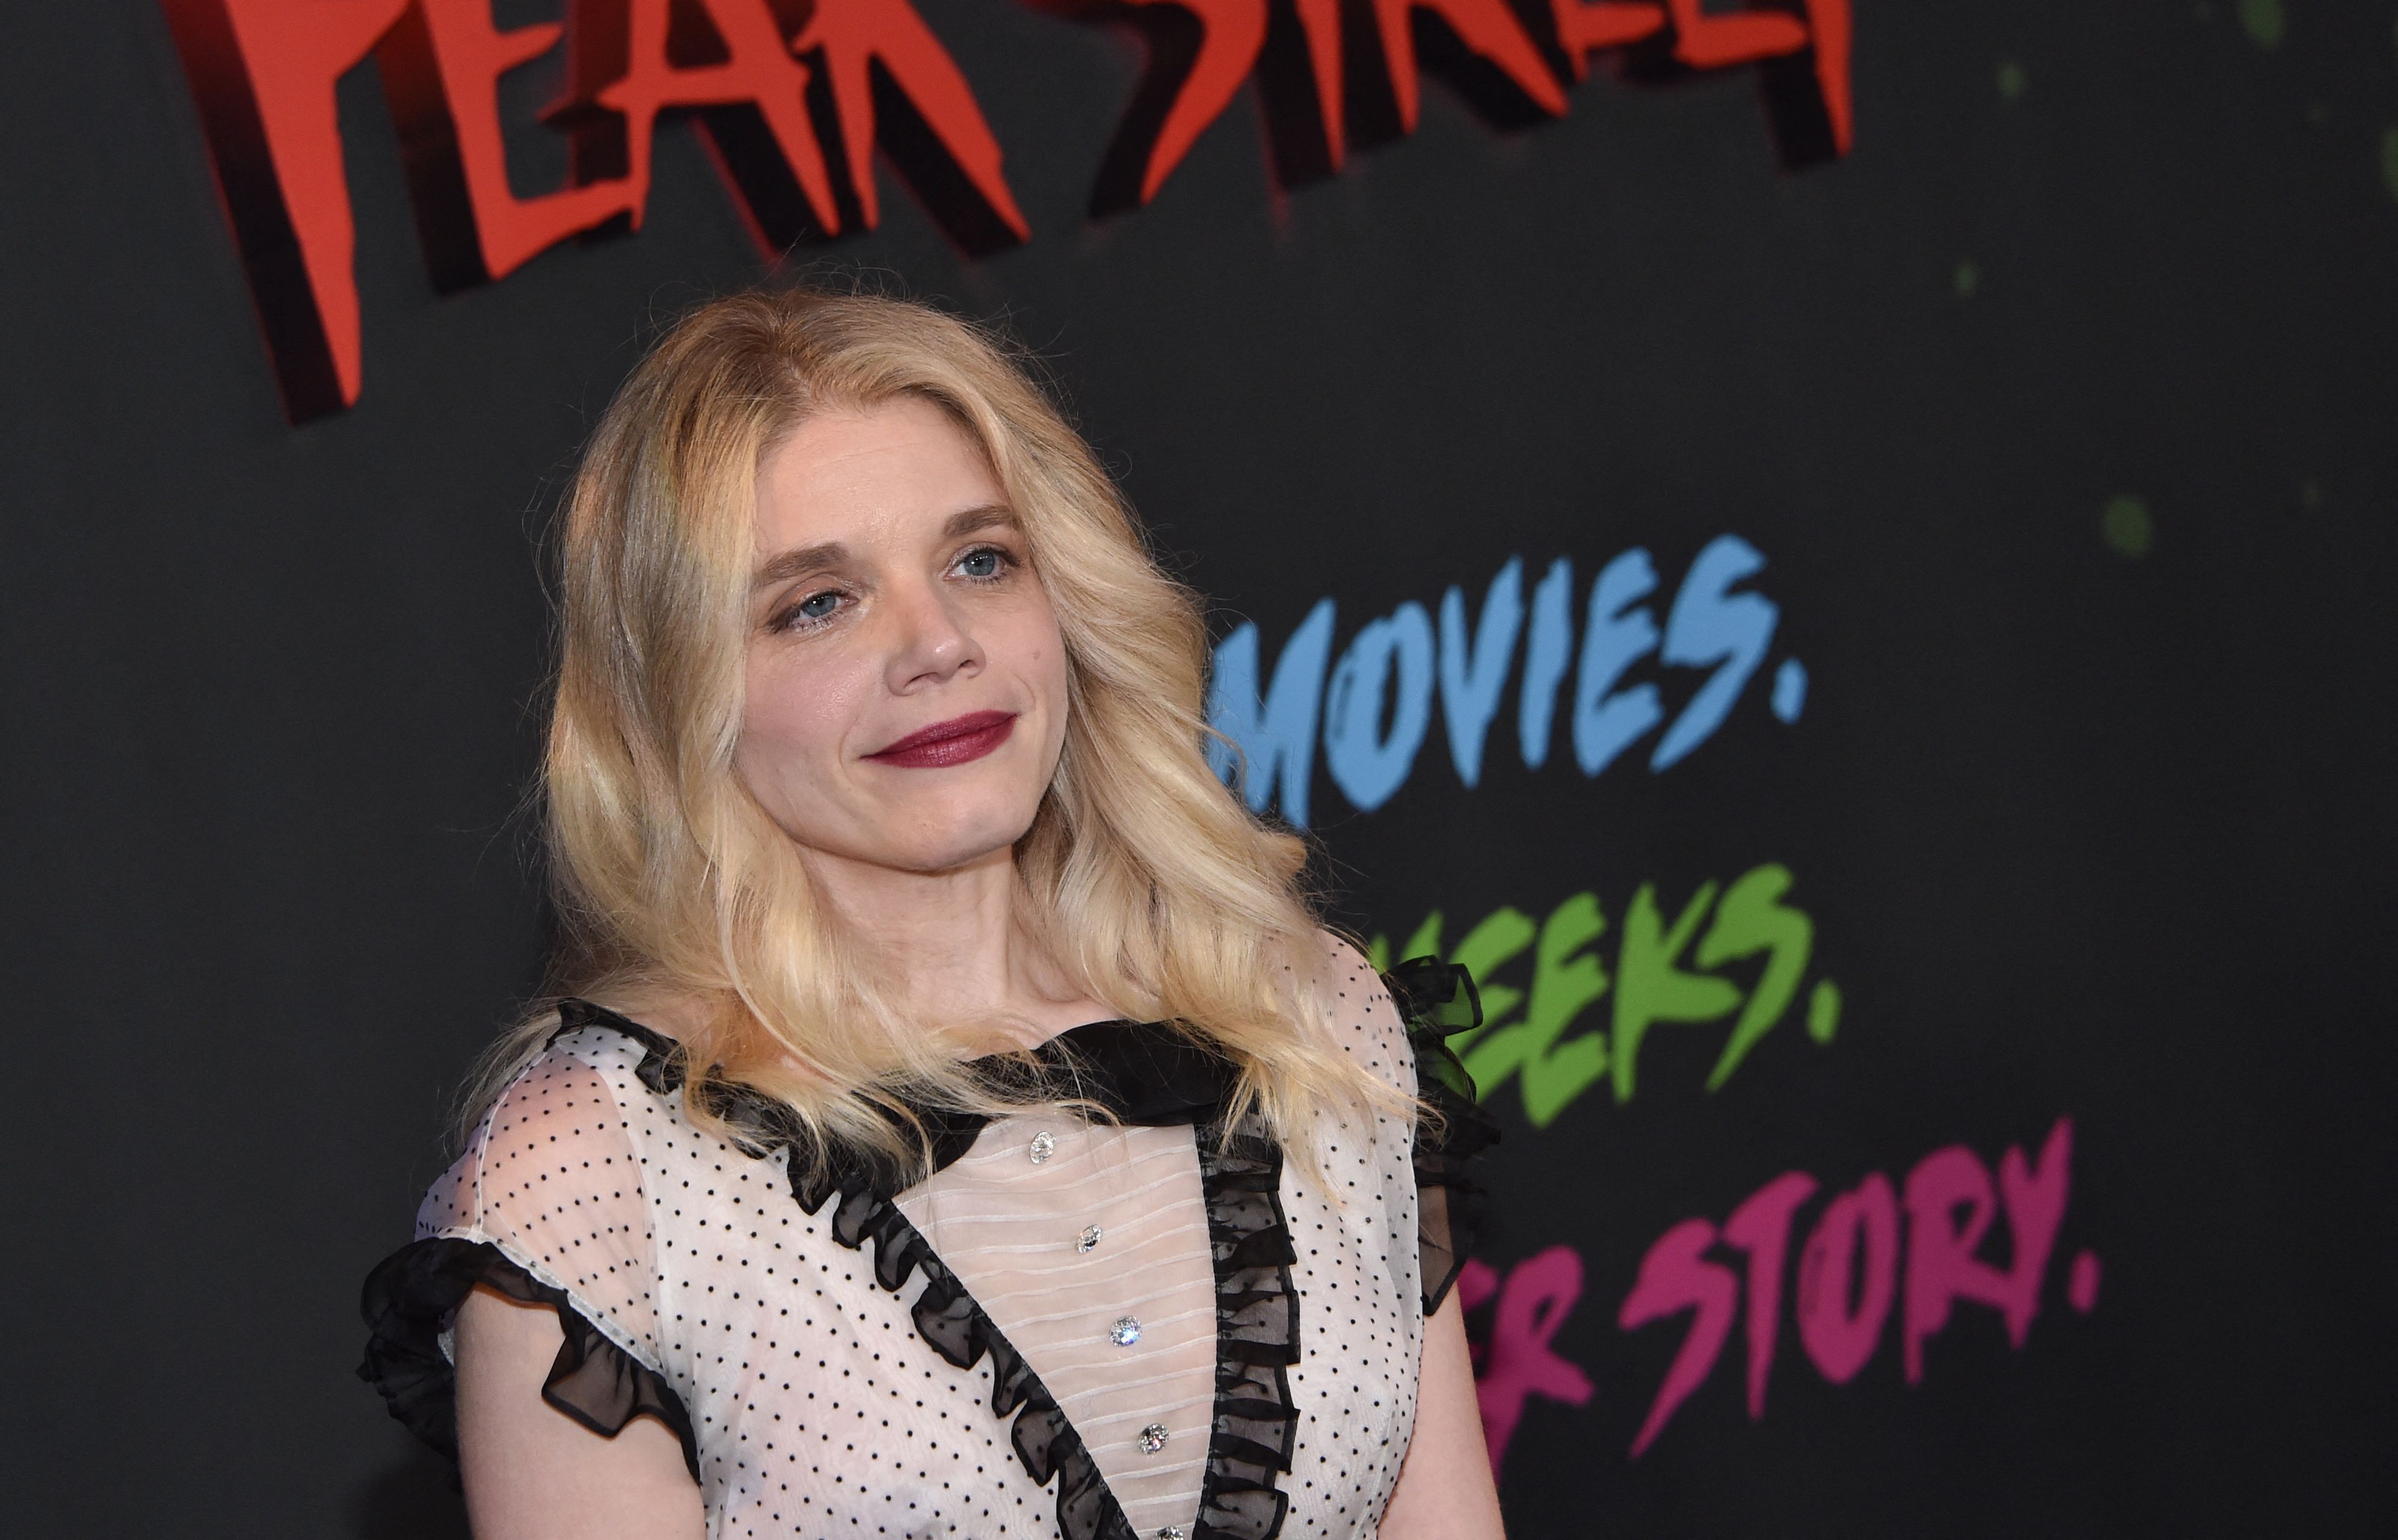 Netflix's Fear Street trilogy director Leigh Janiak wearing a black and white polkadot dress and red lipstick at the film premiere